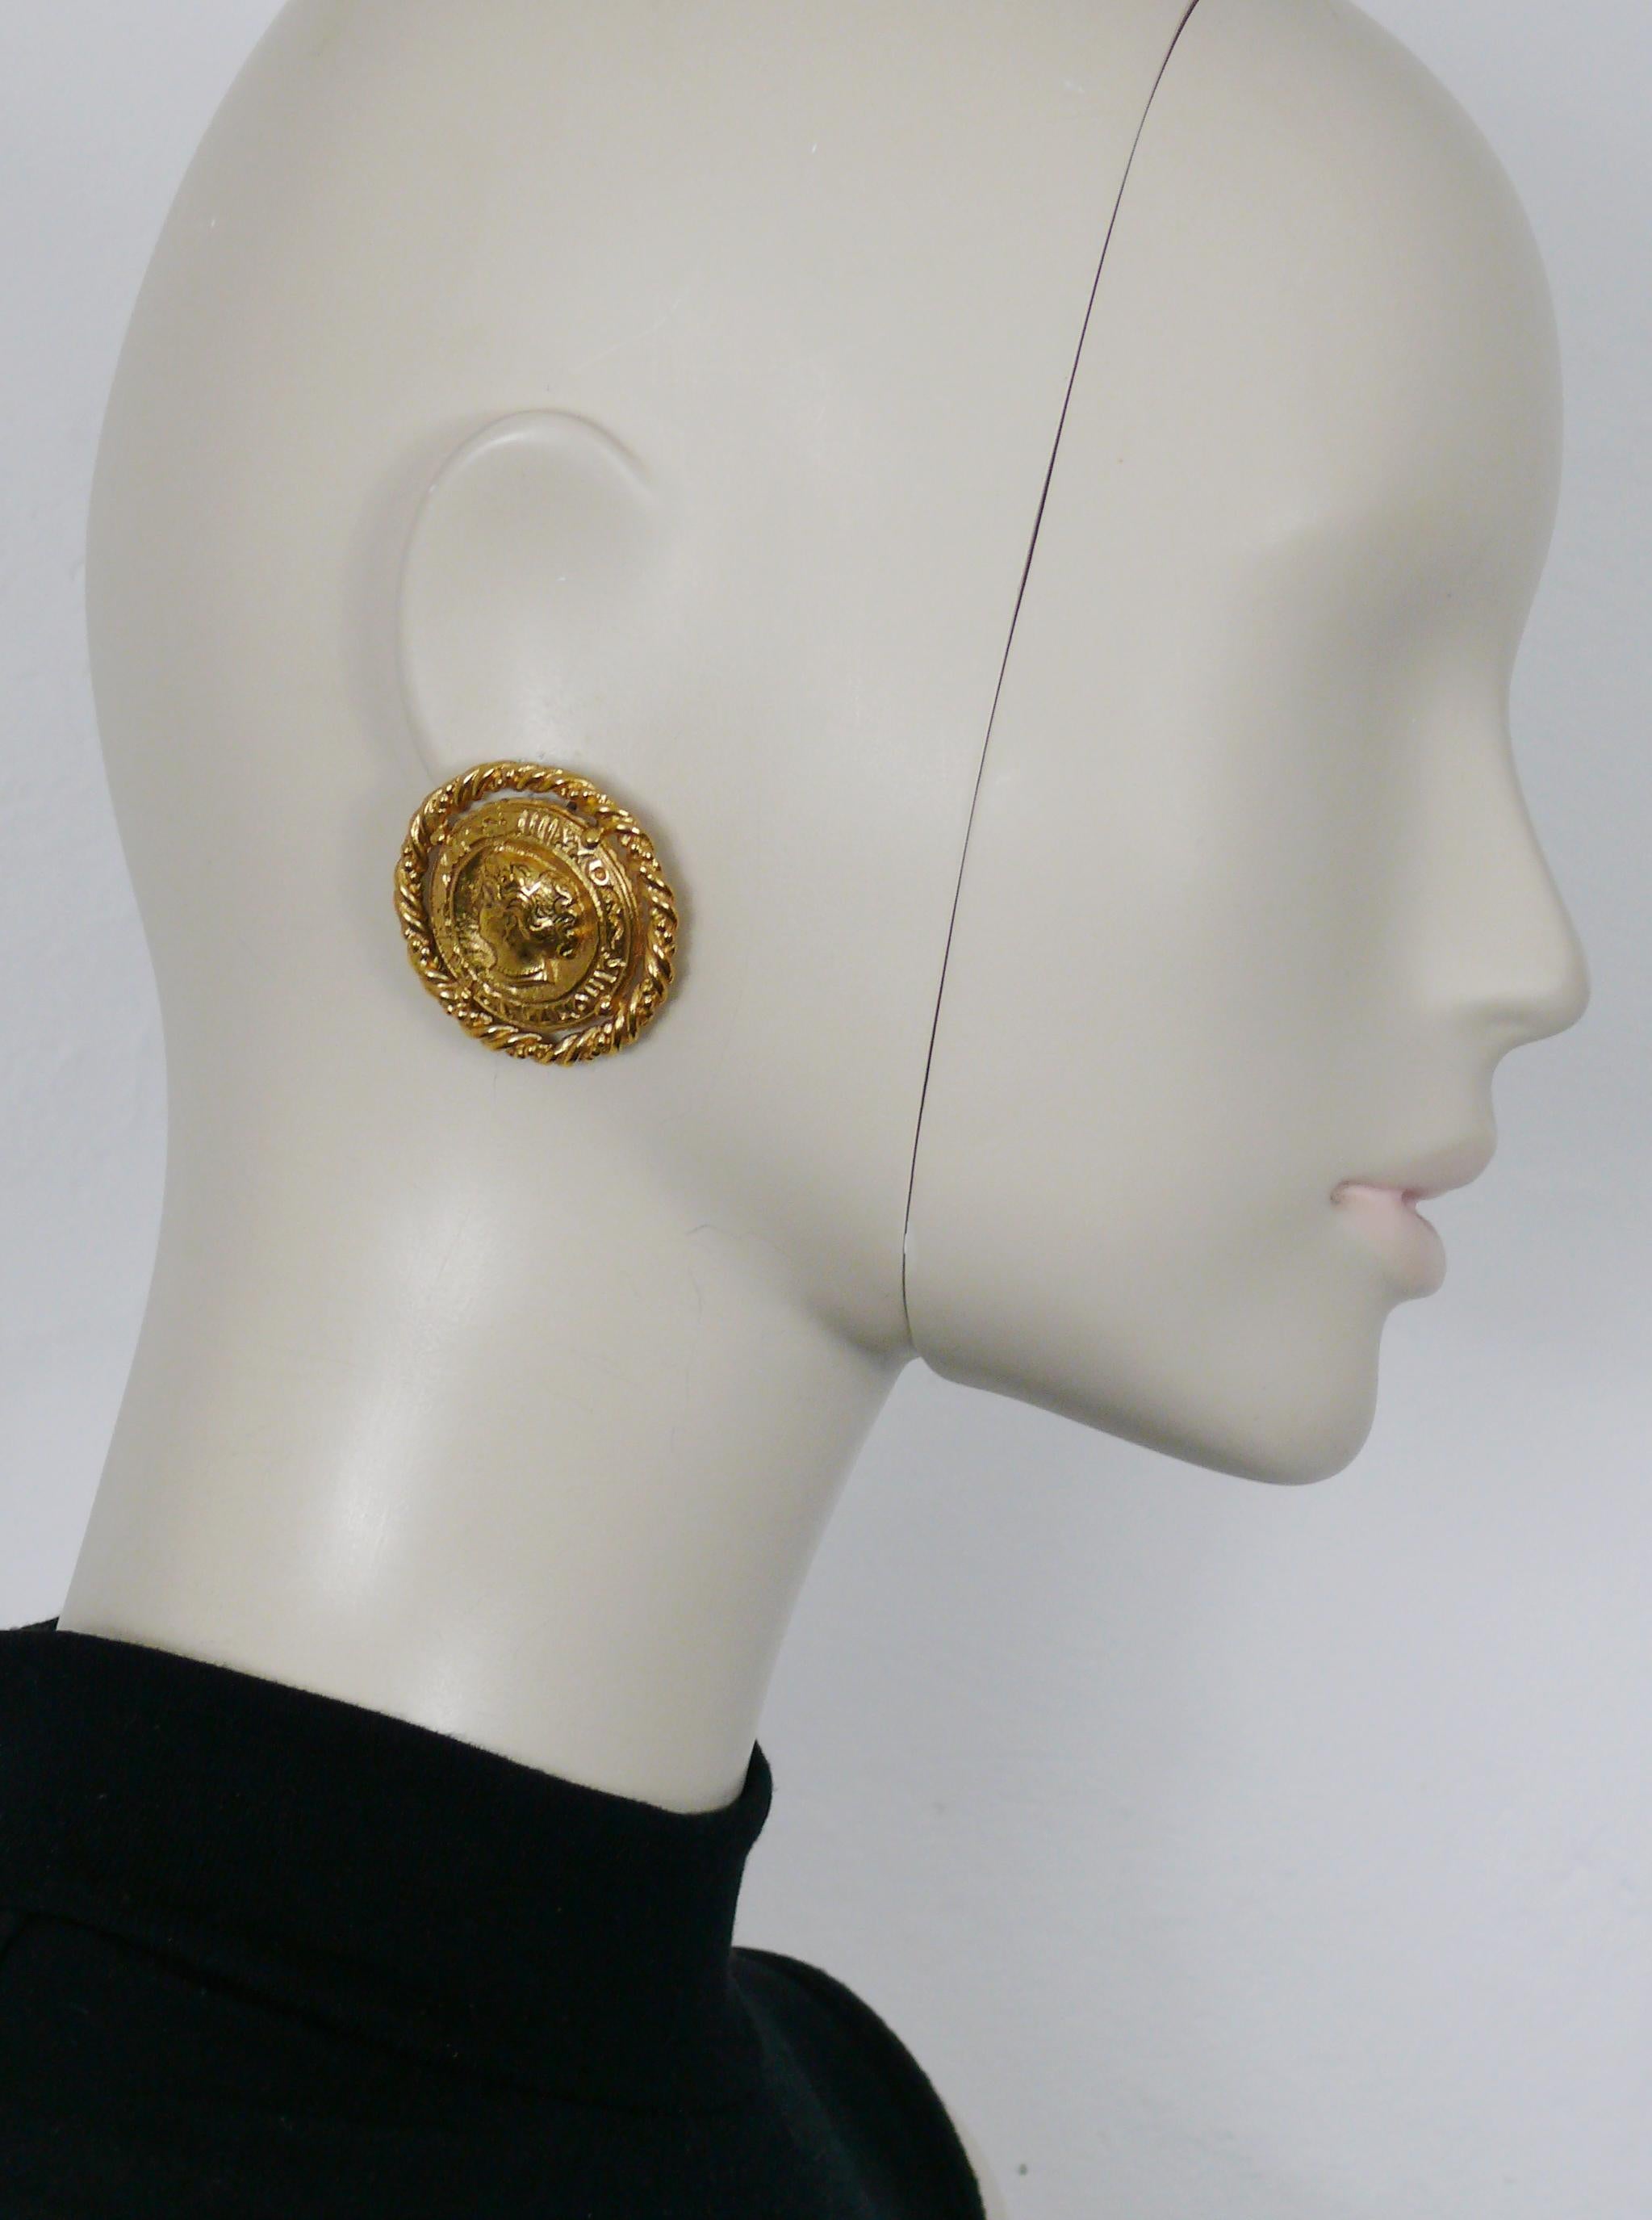 YVES SAINT LAURENT vintage raised gold toned lady profile coin clip-on earrings set in a torsade patterned rim.

Embossed YSL Made in France.

Indicative measurements : diameter approx. 3.8 cm (1.50 inches).

Weight per earring : approx. 18